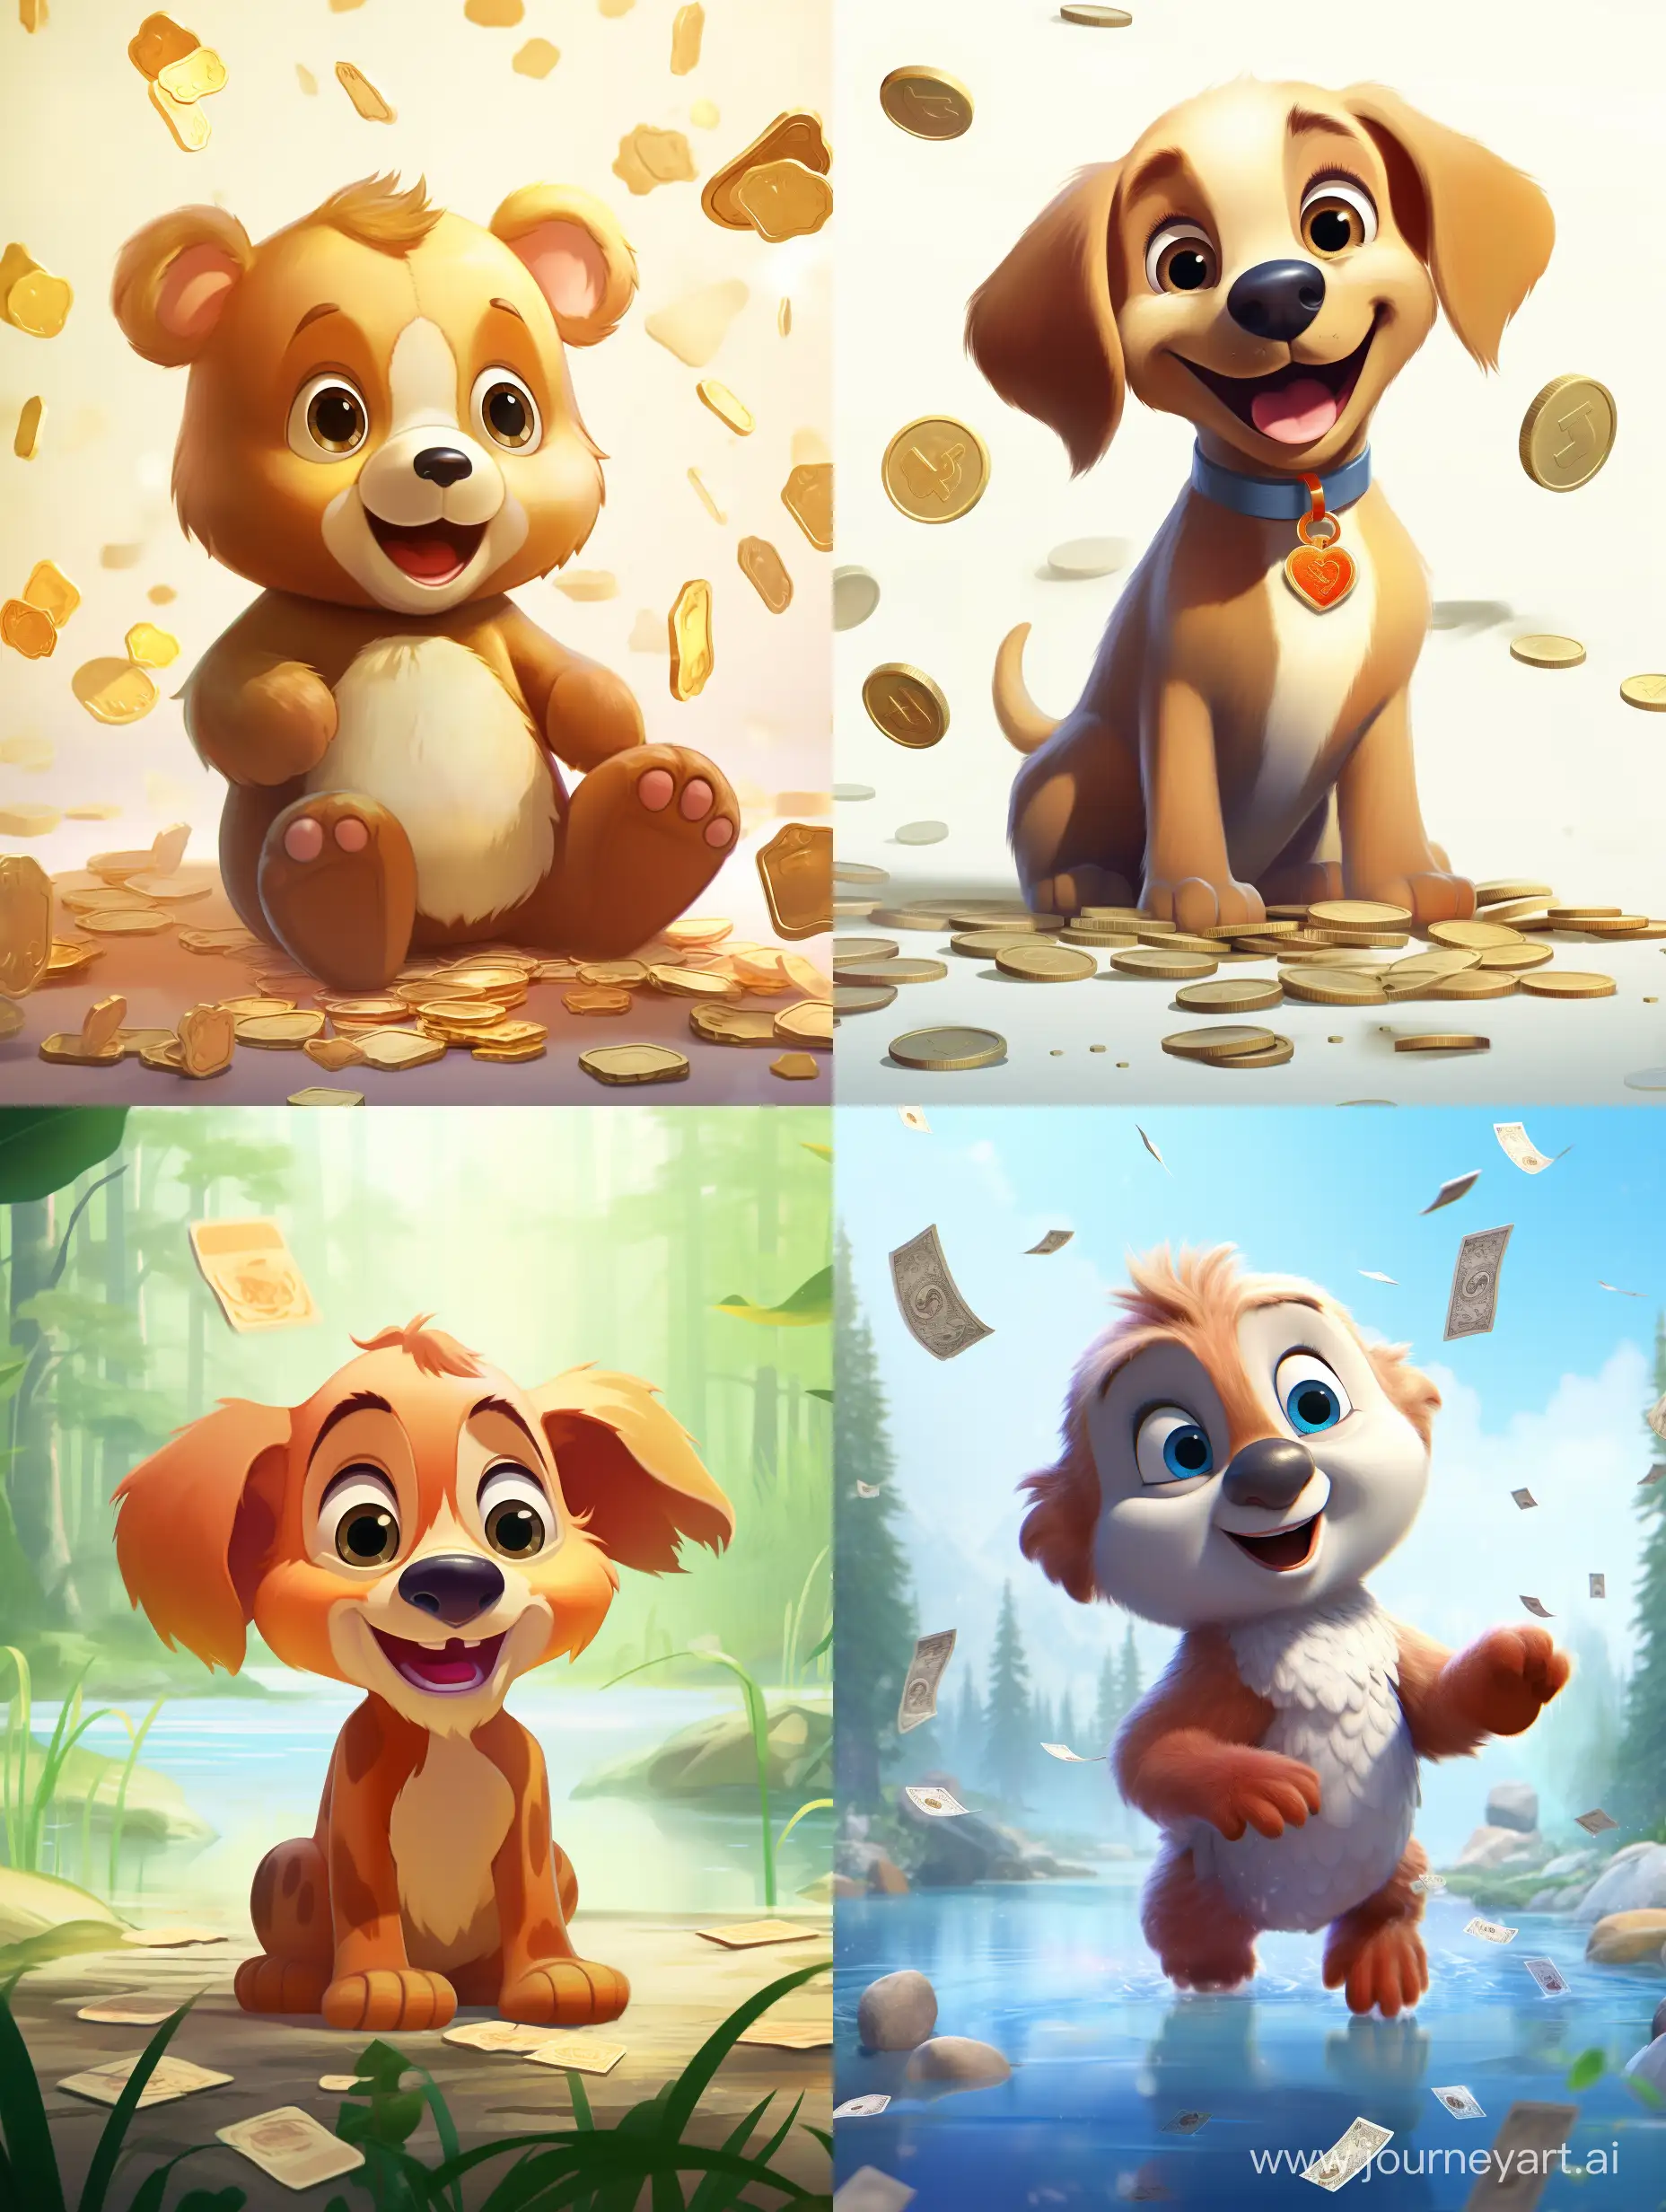 A cute Disney-style animal.He tosses Russian banknotes and coins on a light background